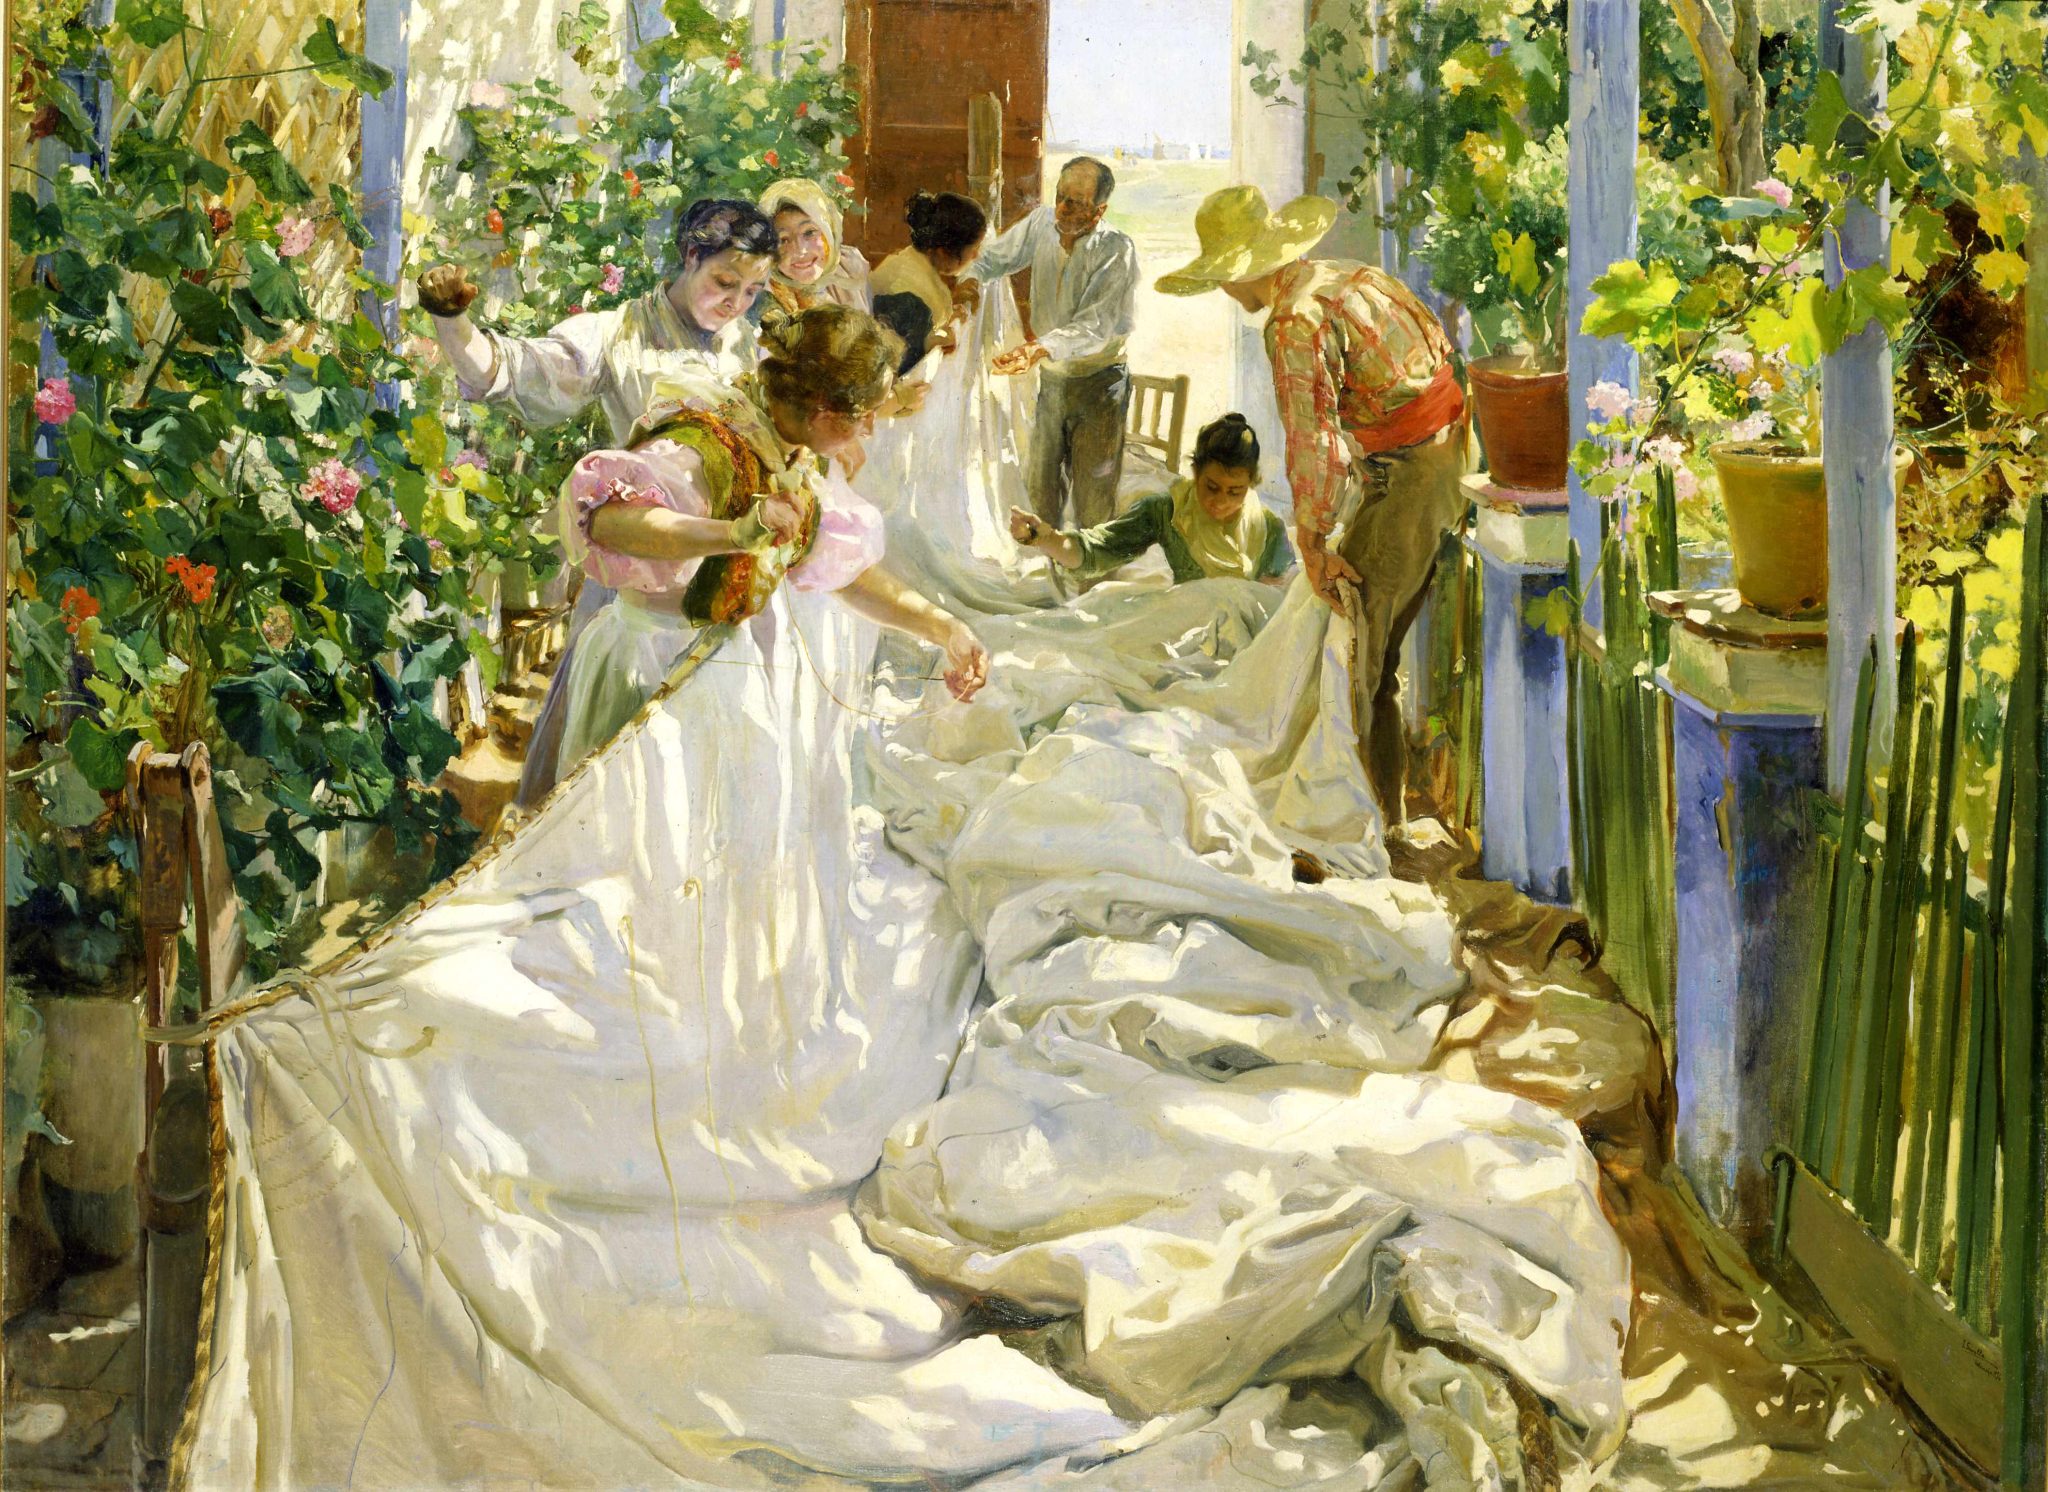 Sewing The Sail by Sorolla paint by numbers